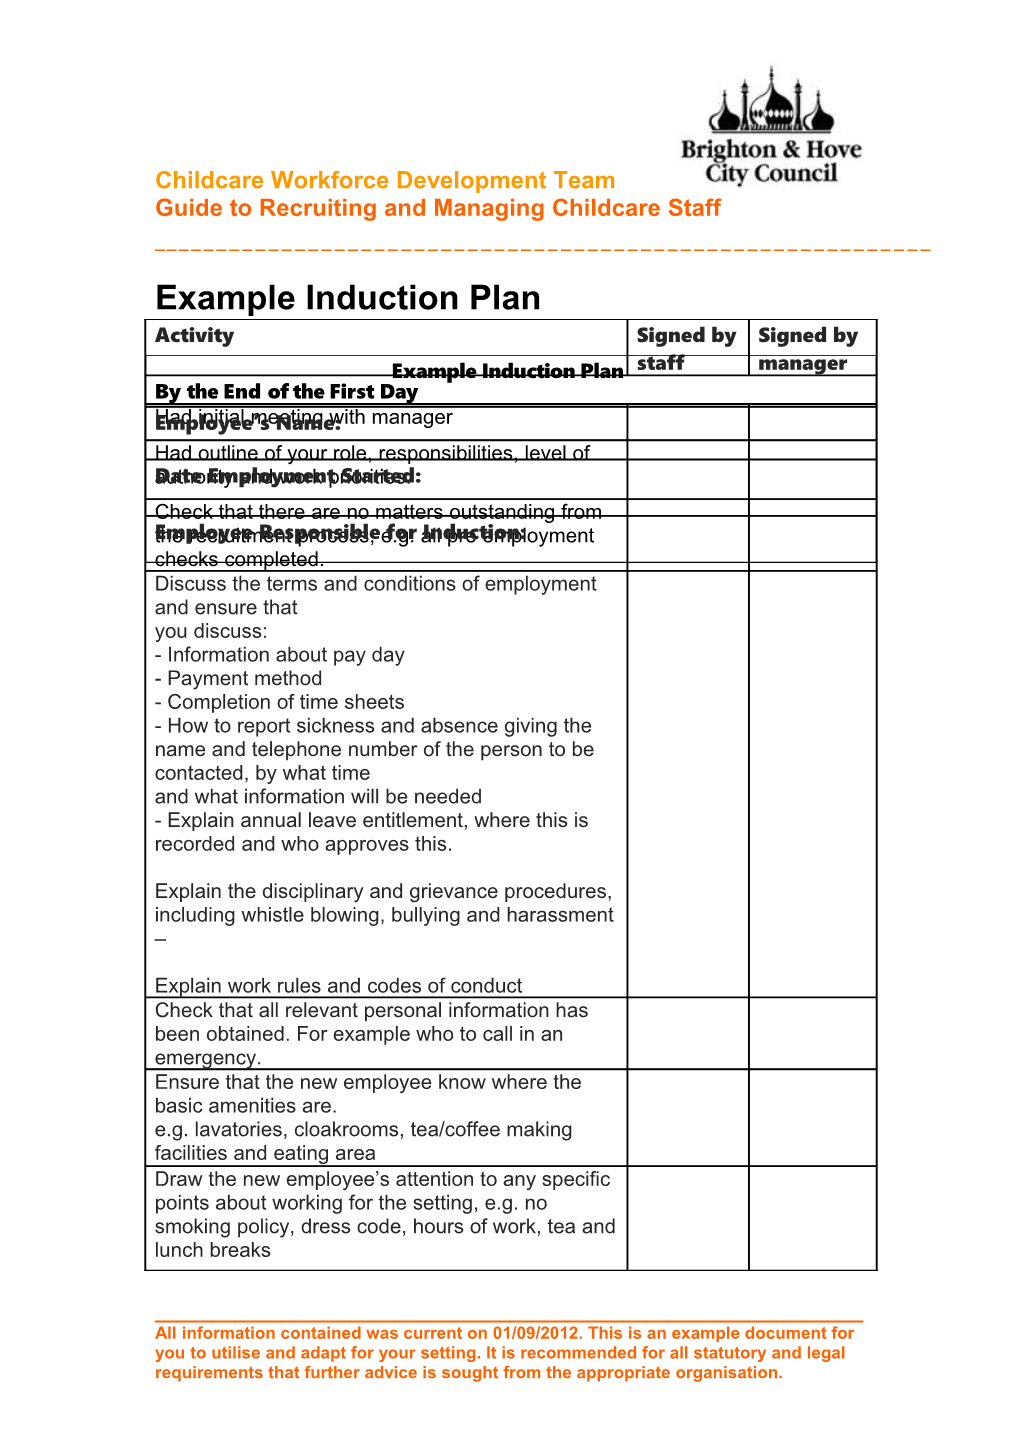 Example Induction Plan